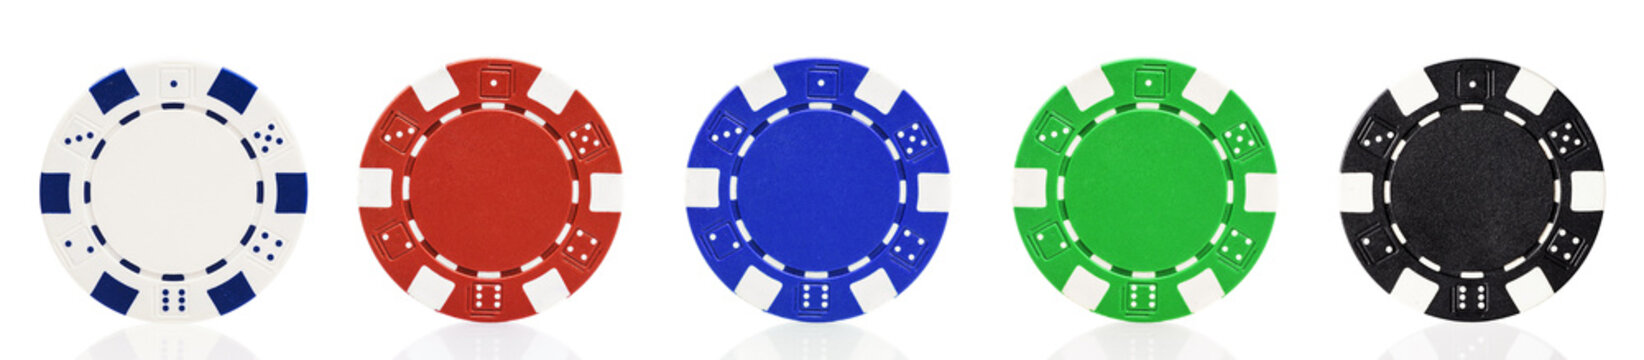 Poker chip isolated on white background